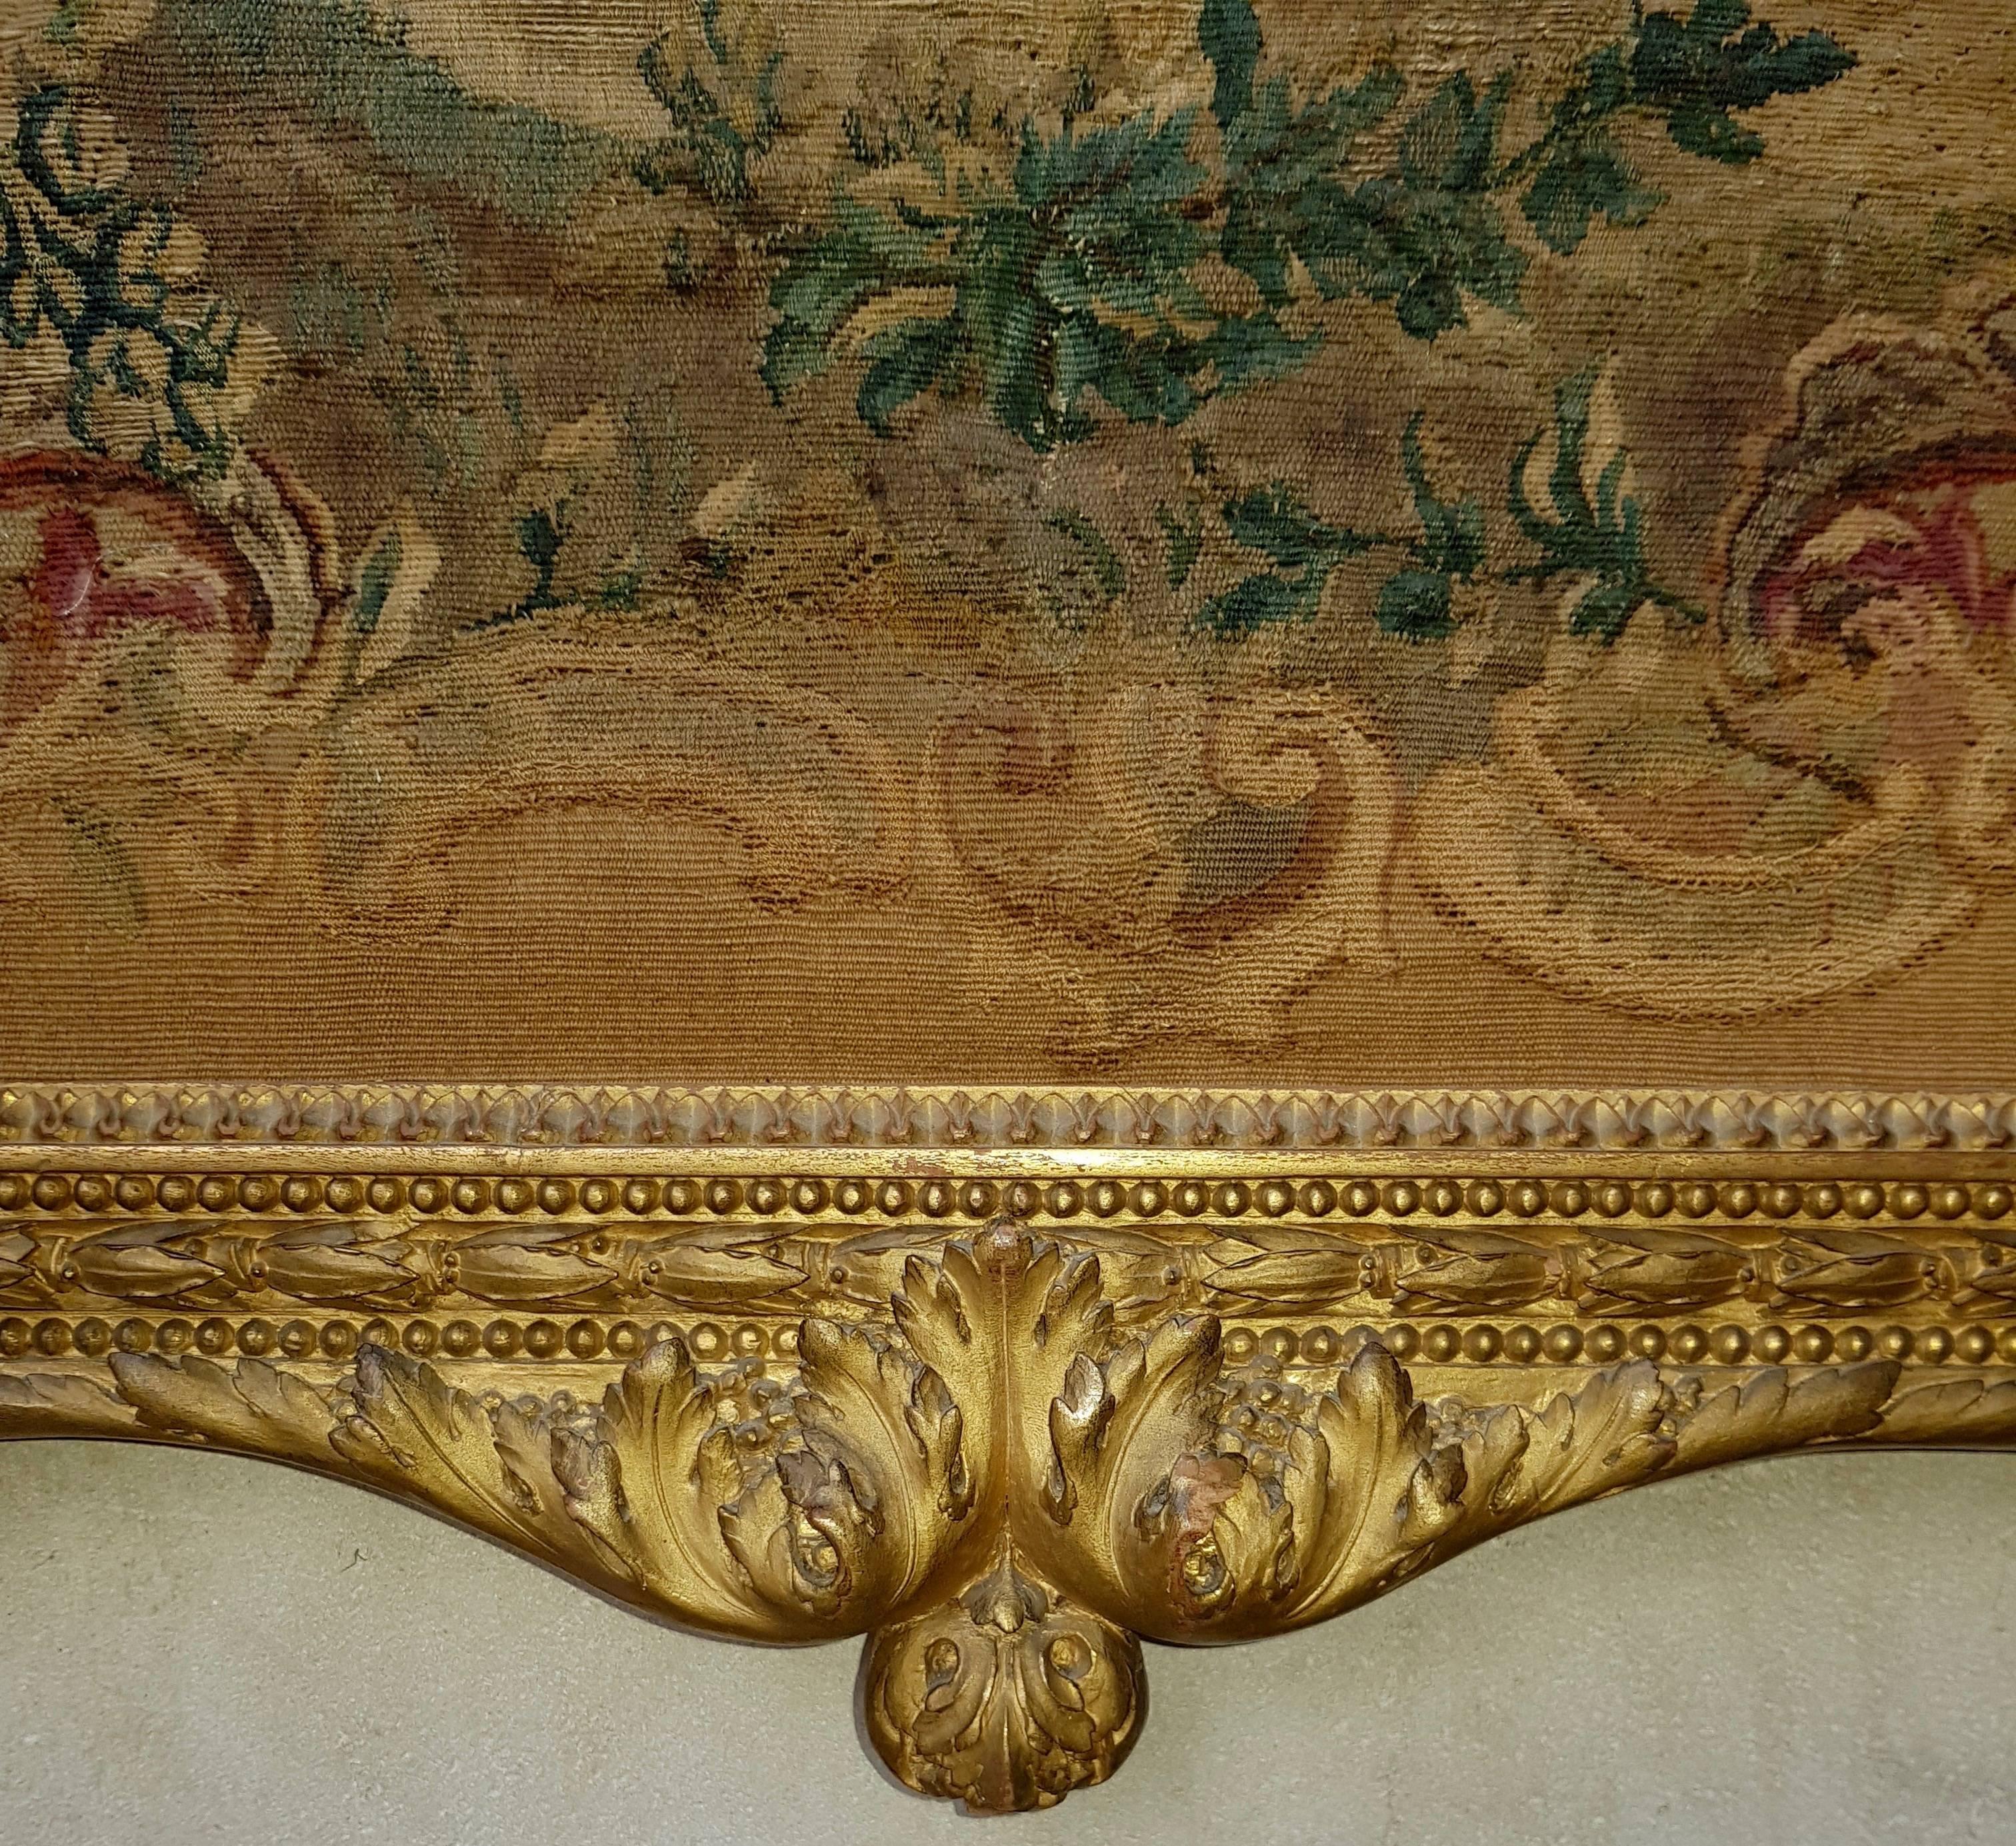 19th Century Aubusson Tapestry Panel in Original Giltwood Frame 2